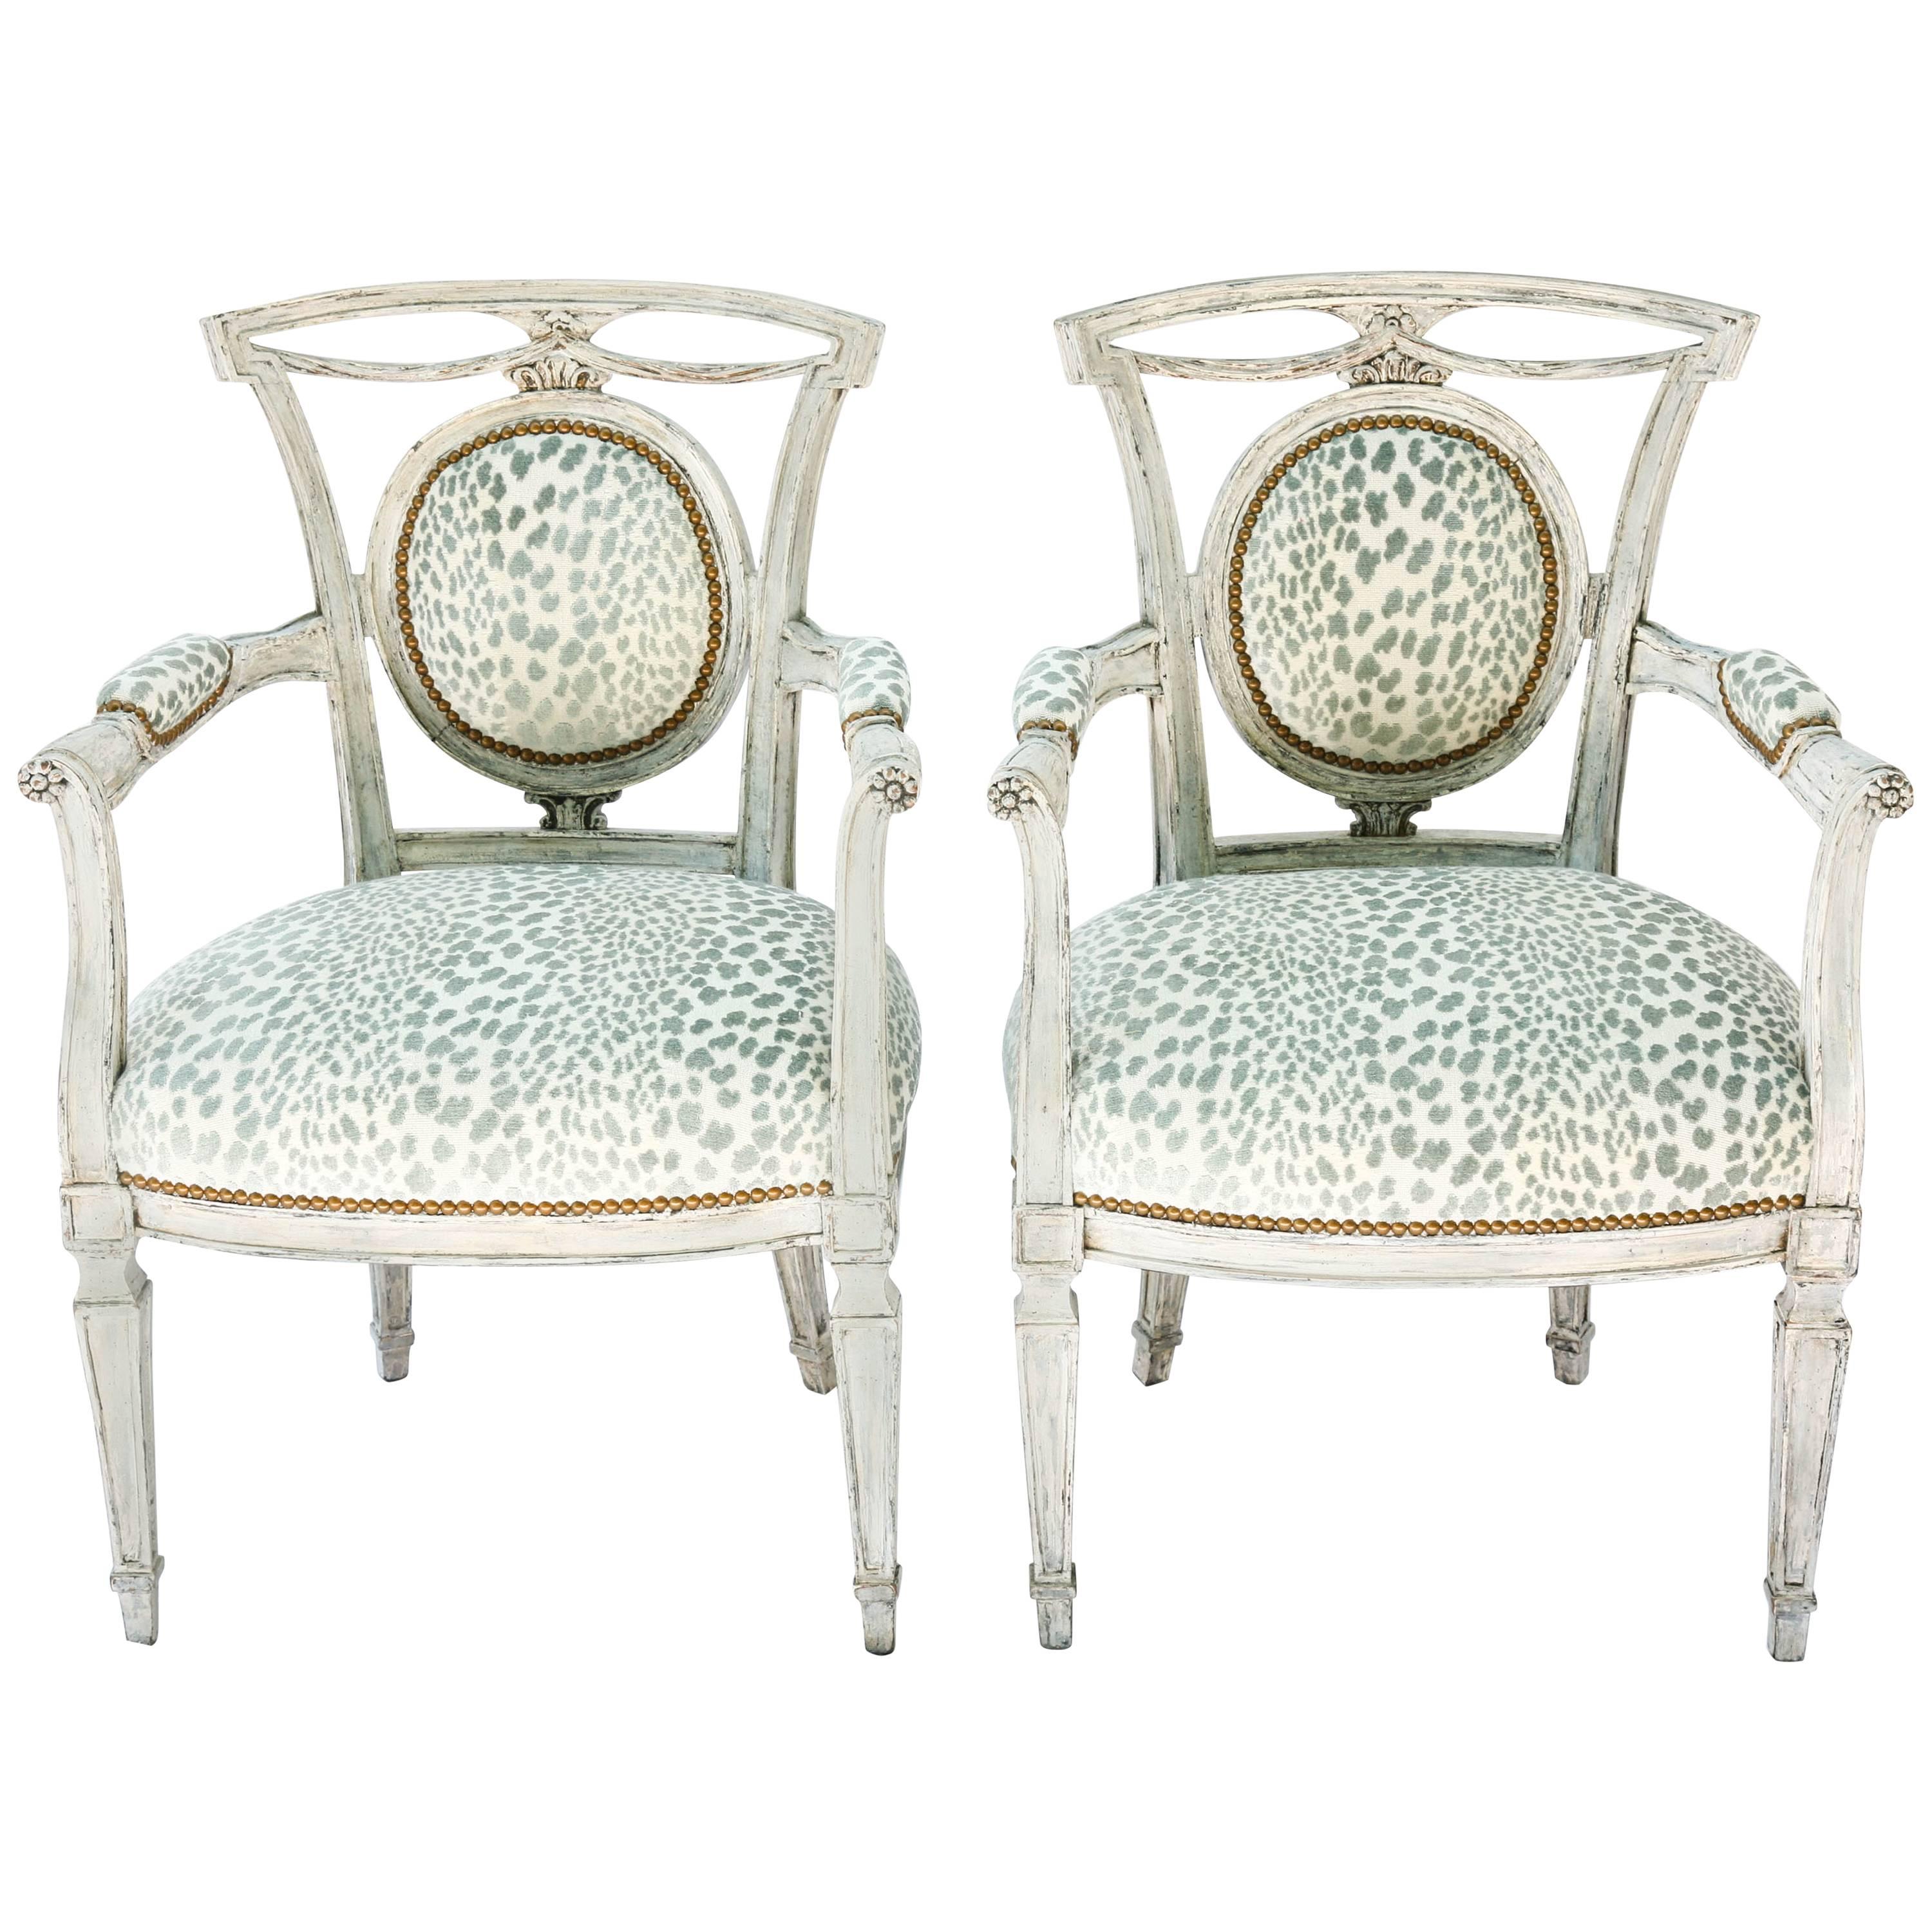 Pair of Venetian Style Painted Armchairs, Early 20th Century